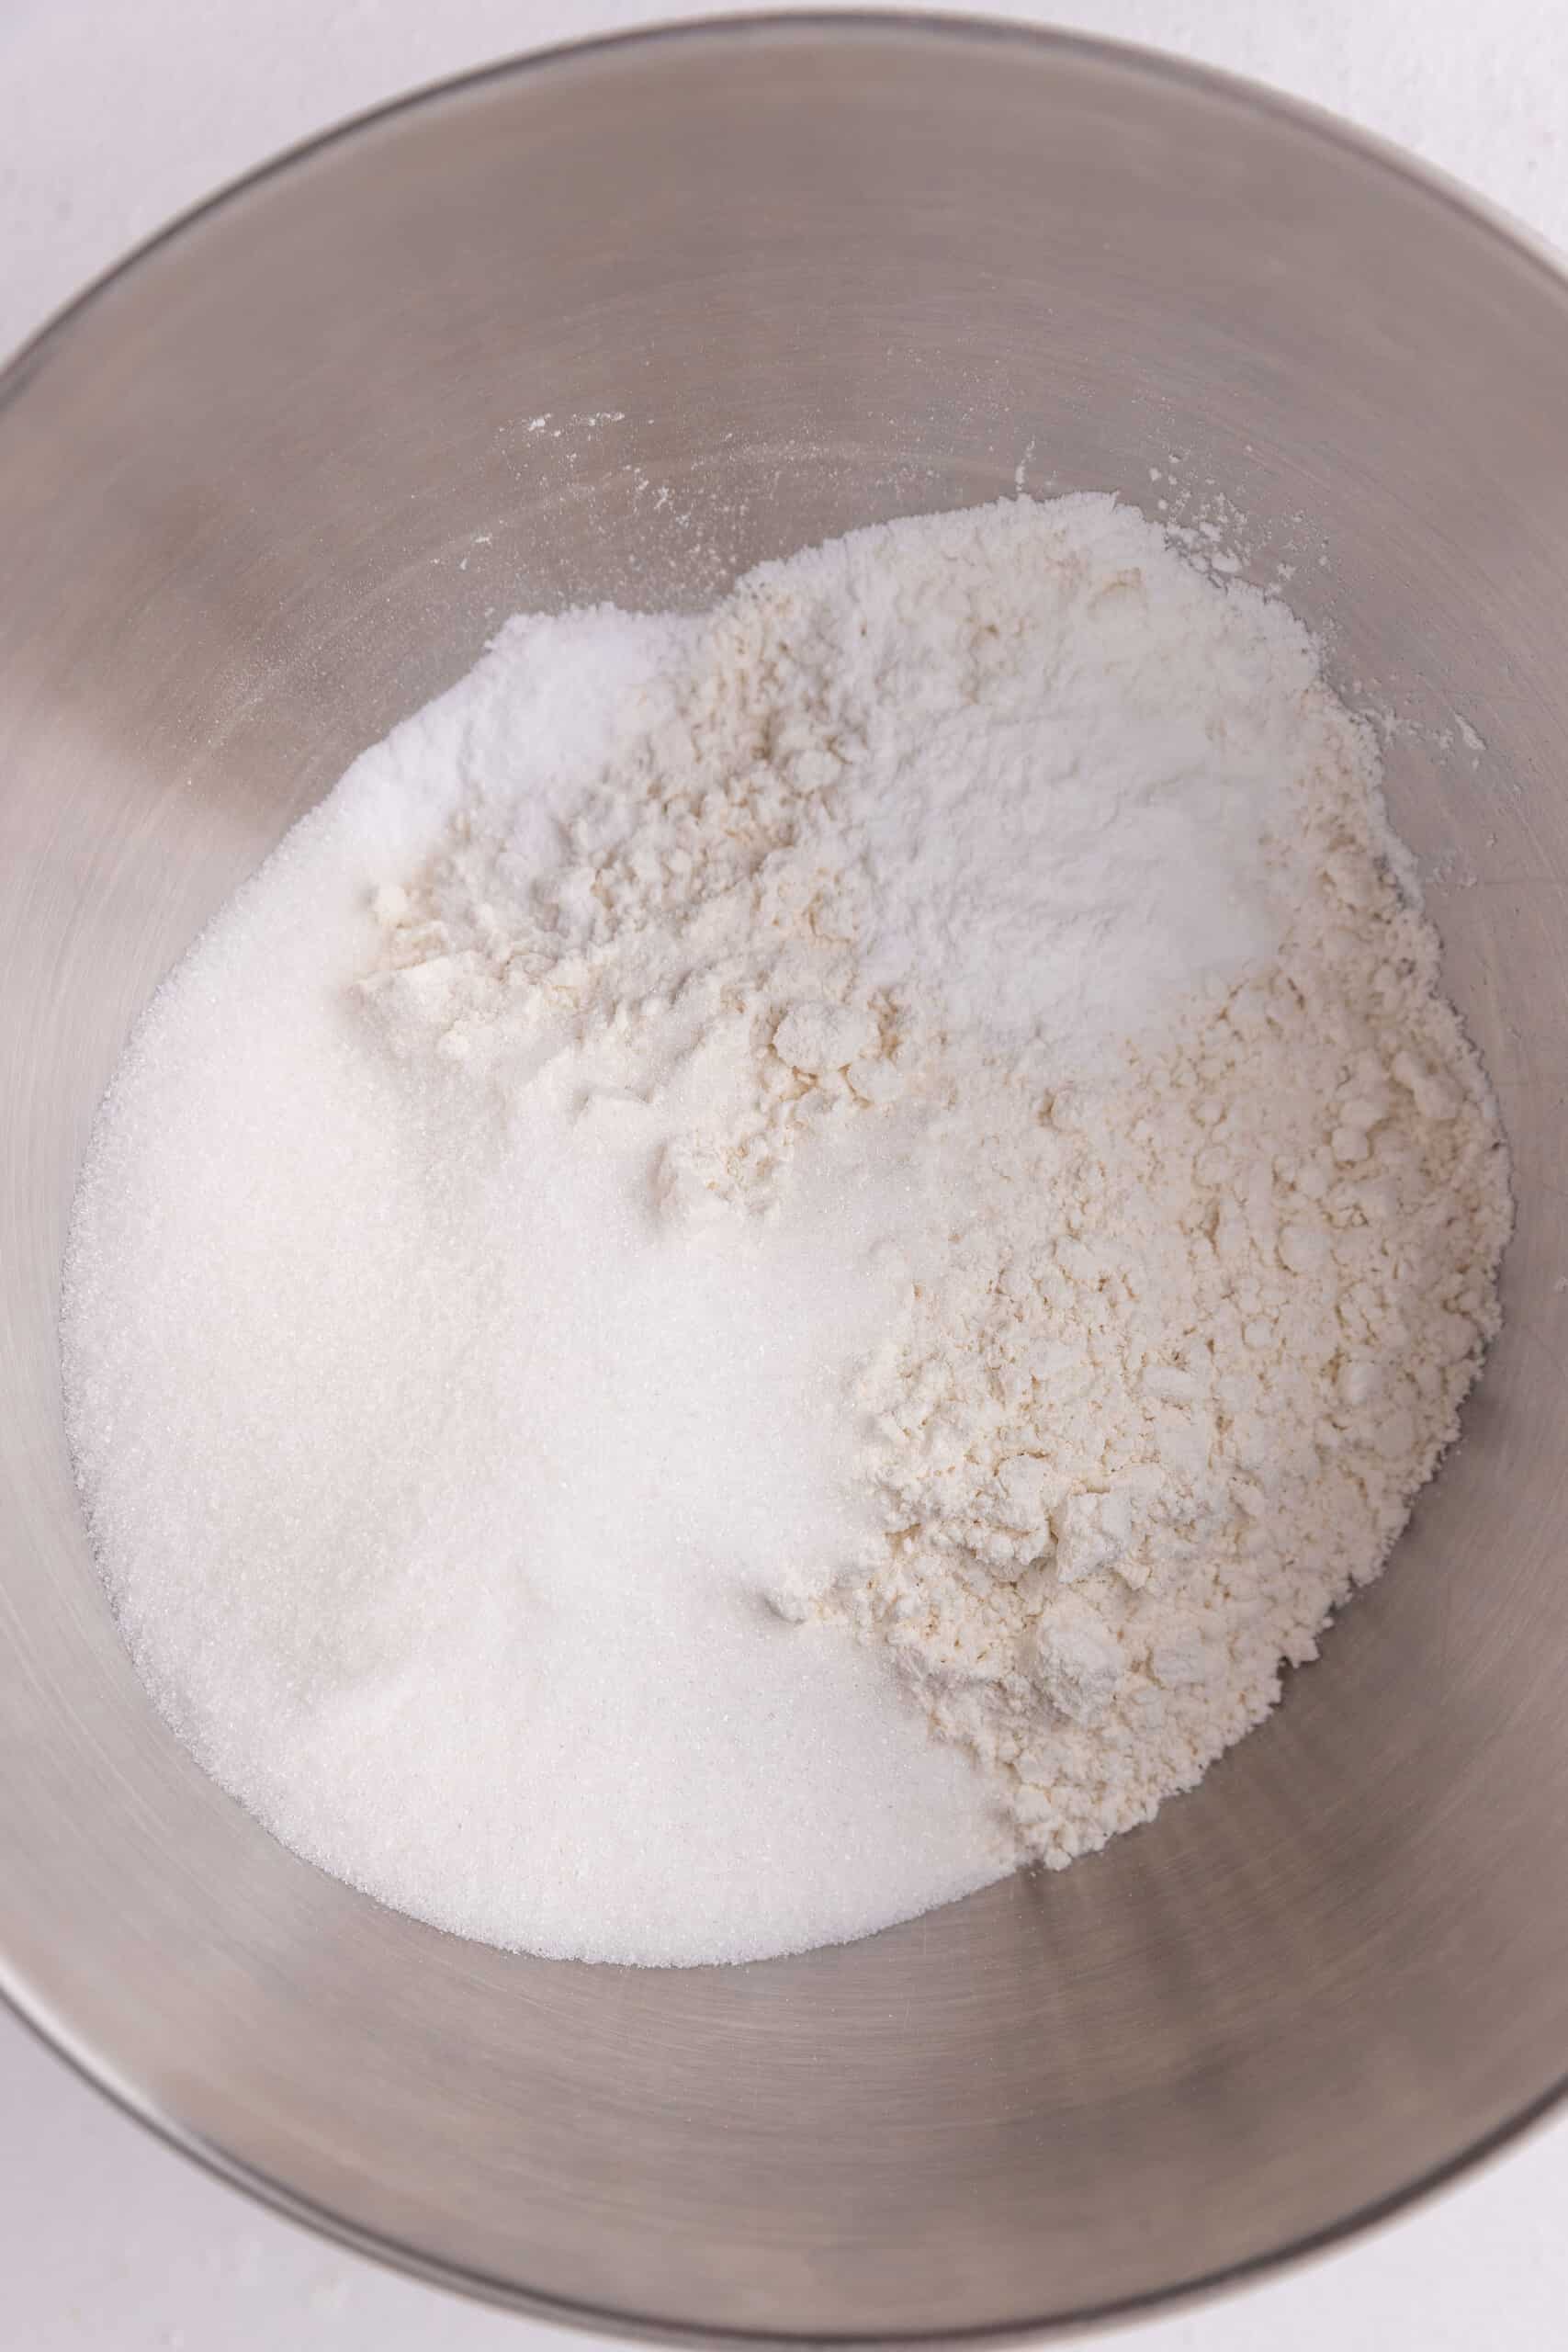 Flour and sugar in bowl.